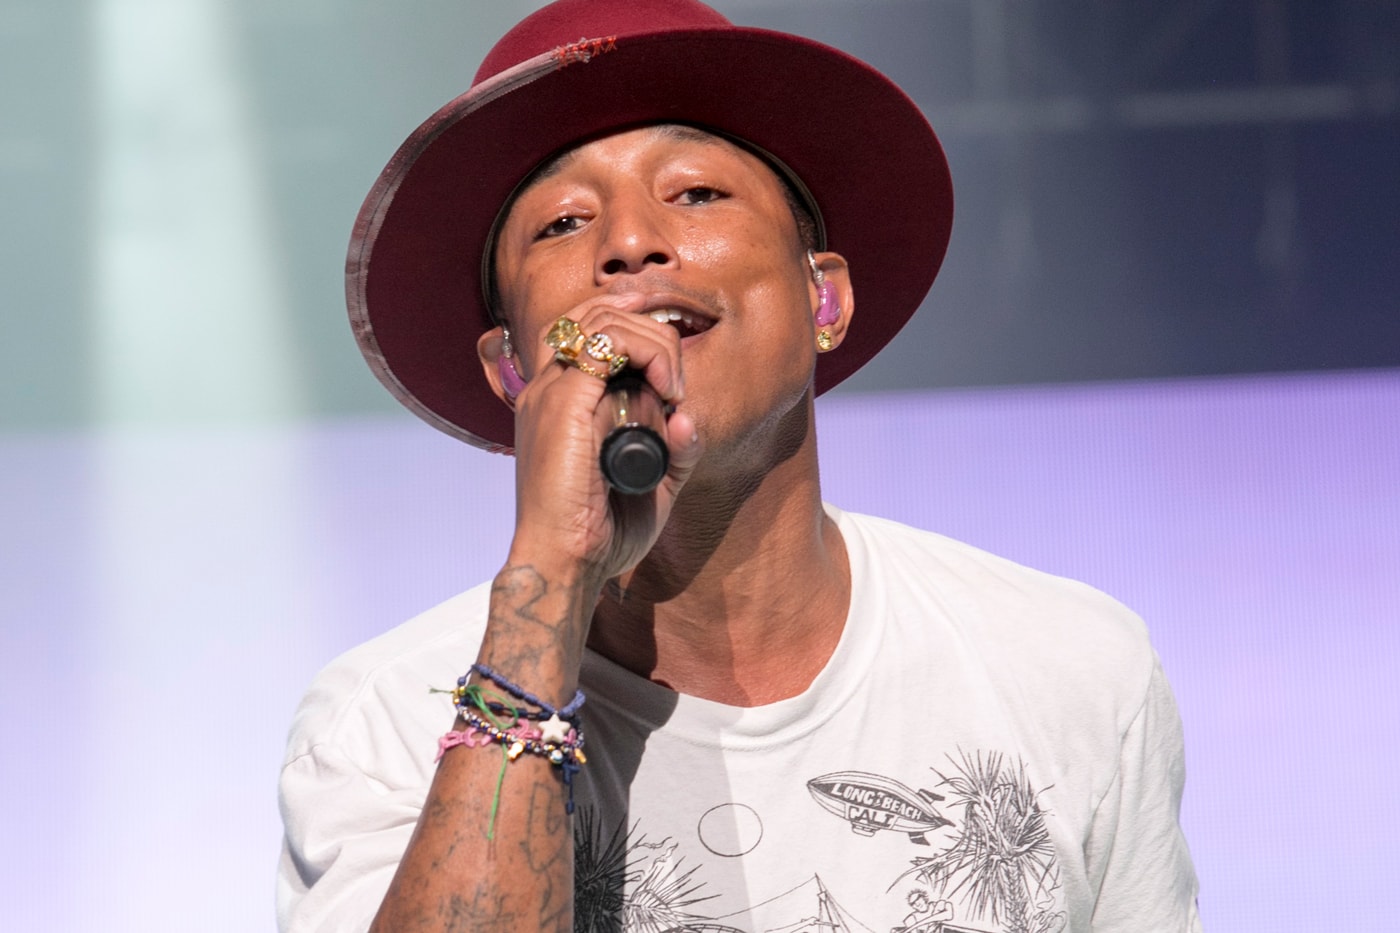 Pharrell Williams & Jimmy Fallon - Reflections With Justin Bieber